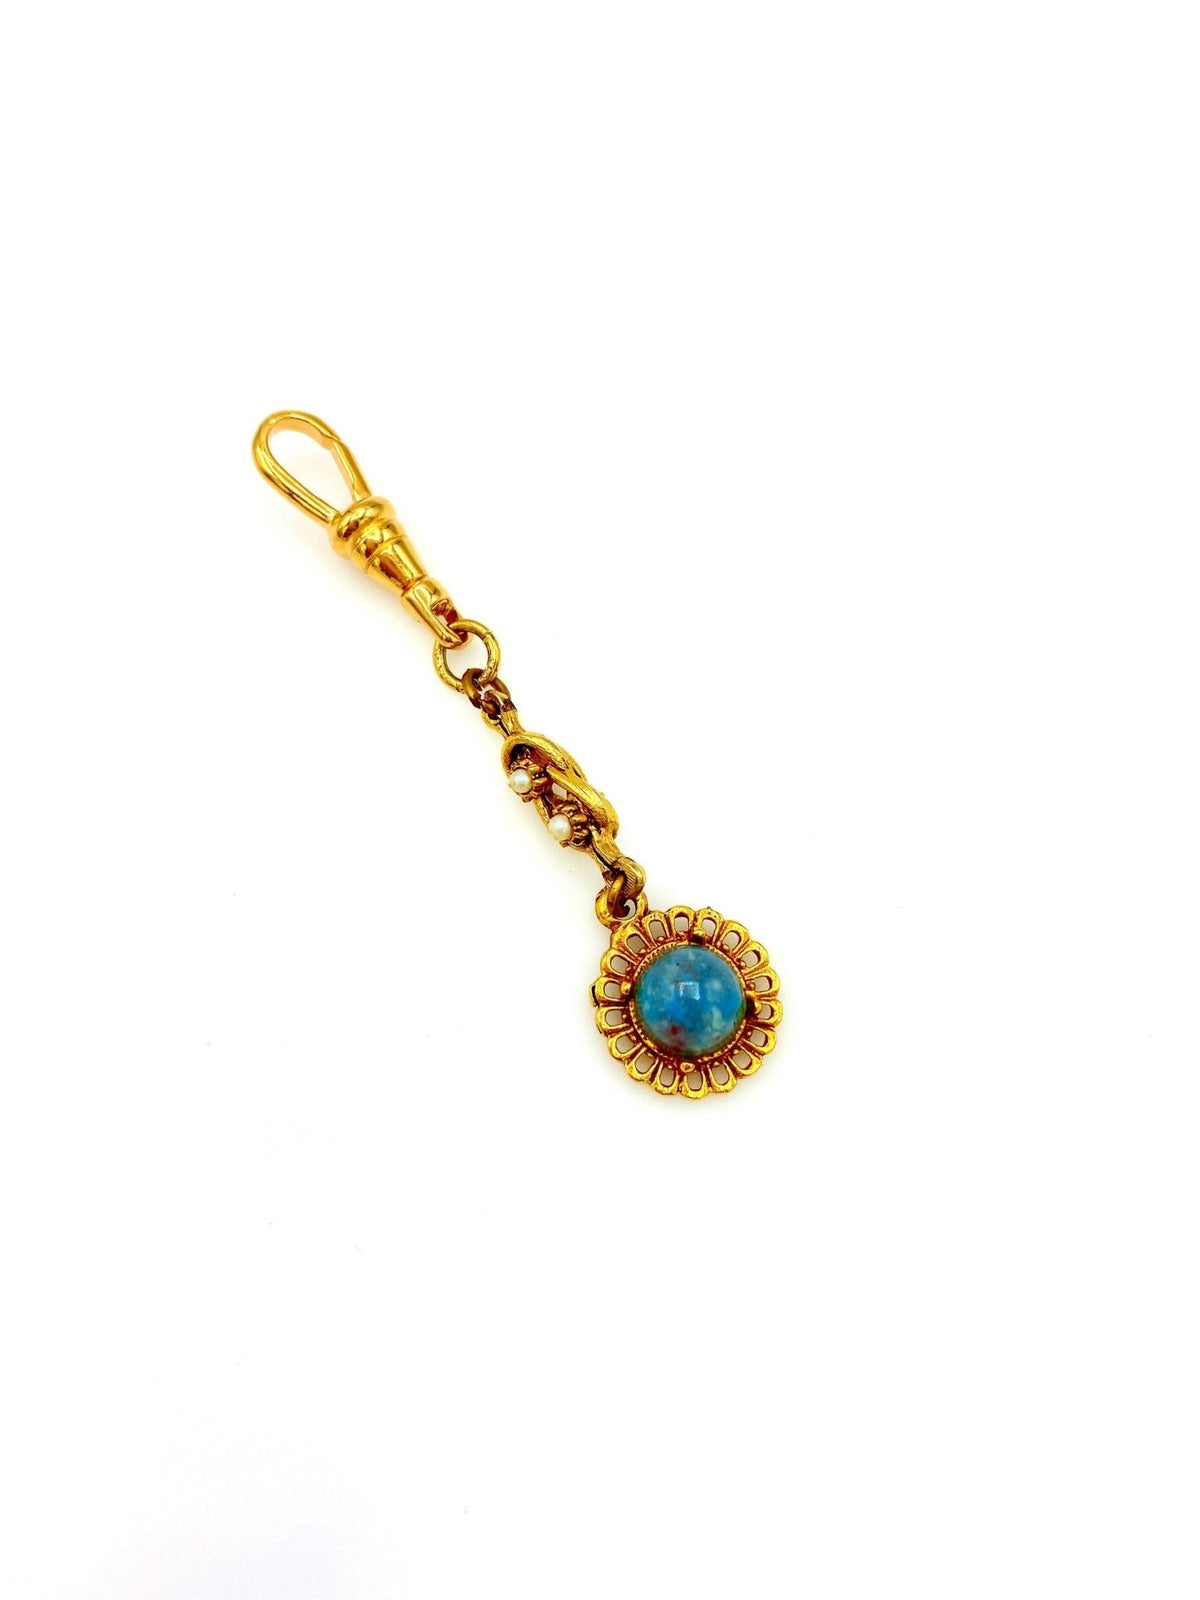 Gold Daisy Victorian Revival Charm - 24 Wishes Vintage Jewelry